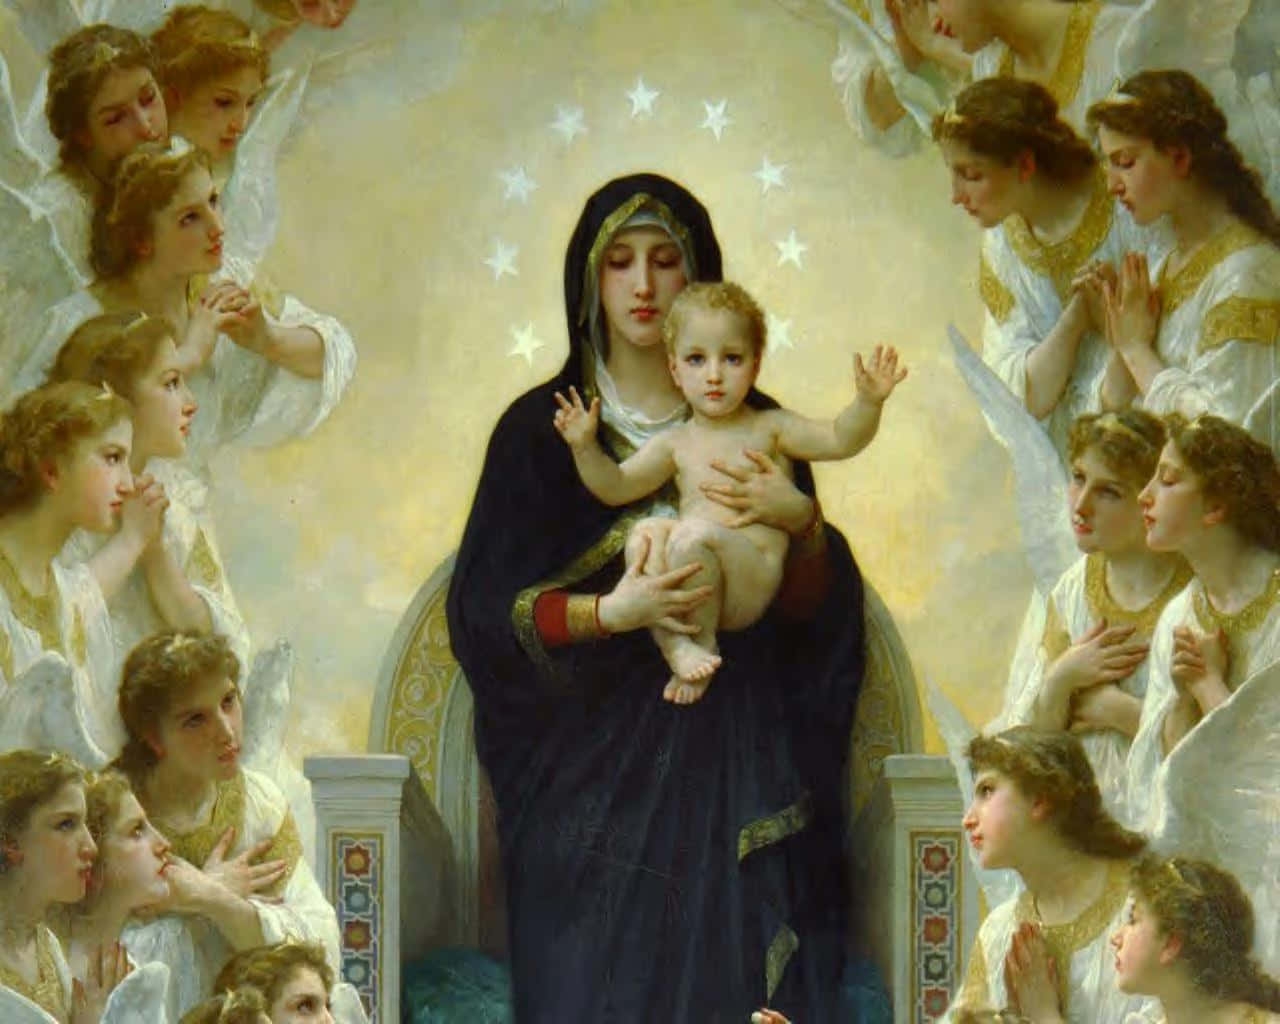 The brilliant gaze of Mother Mary. Wallpaper